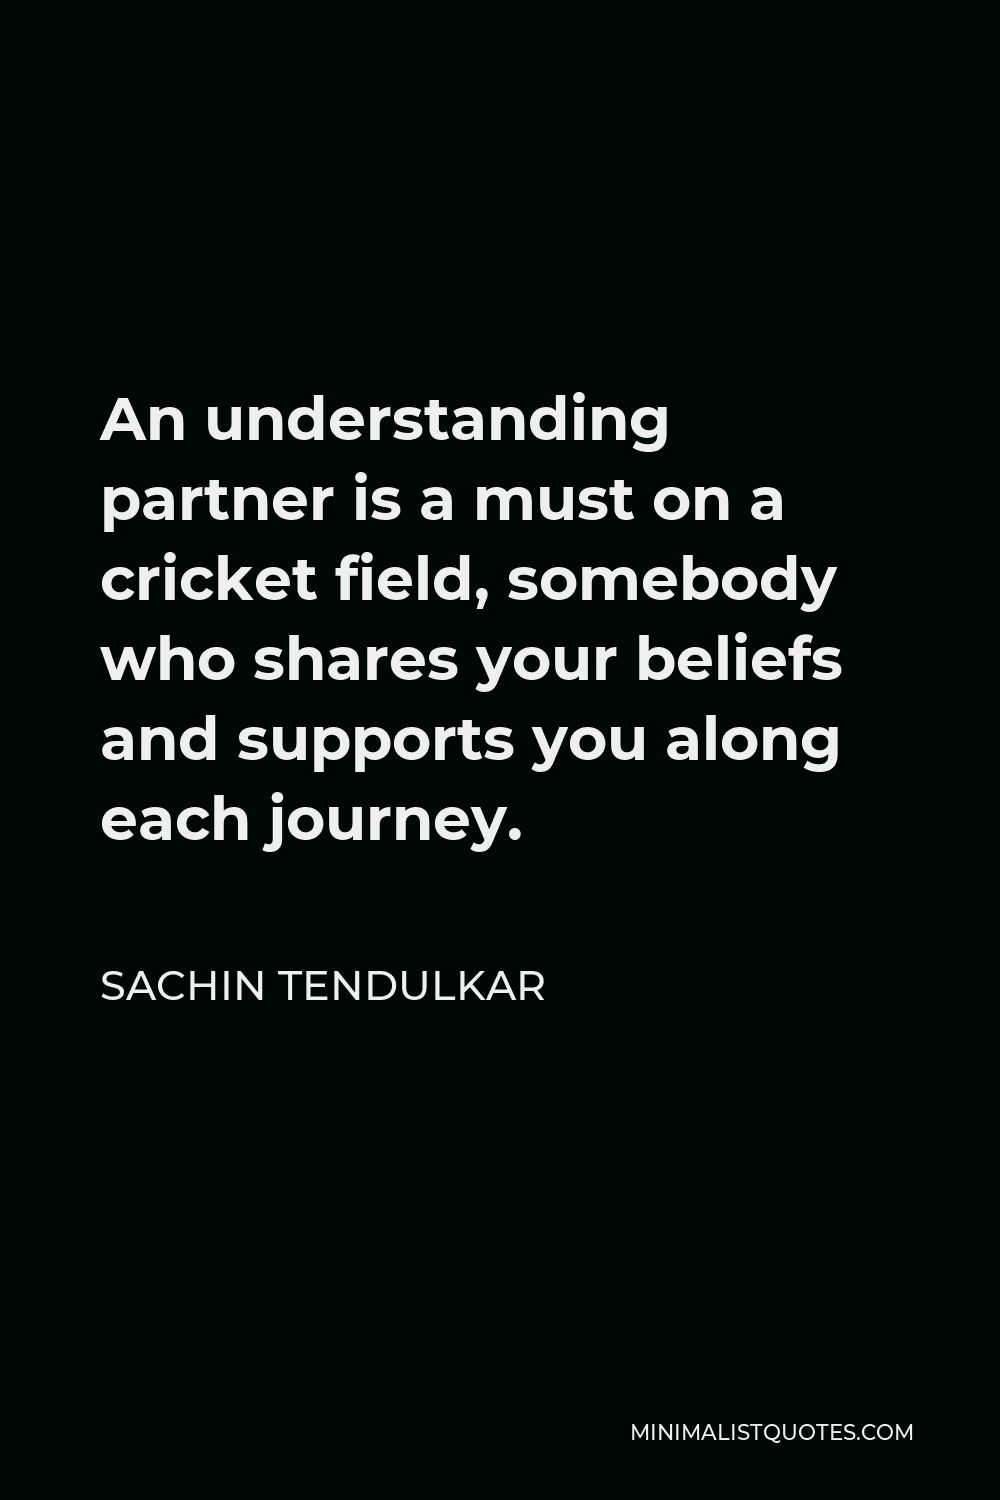 Sachin Tendulkar Quote - An understanding partner is a must on a cricket field, somebody who shares your beliefs and supports you along each journey.